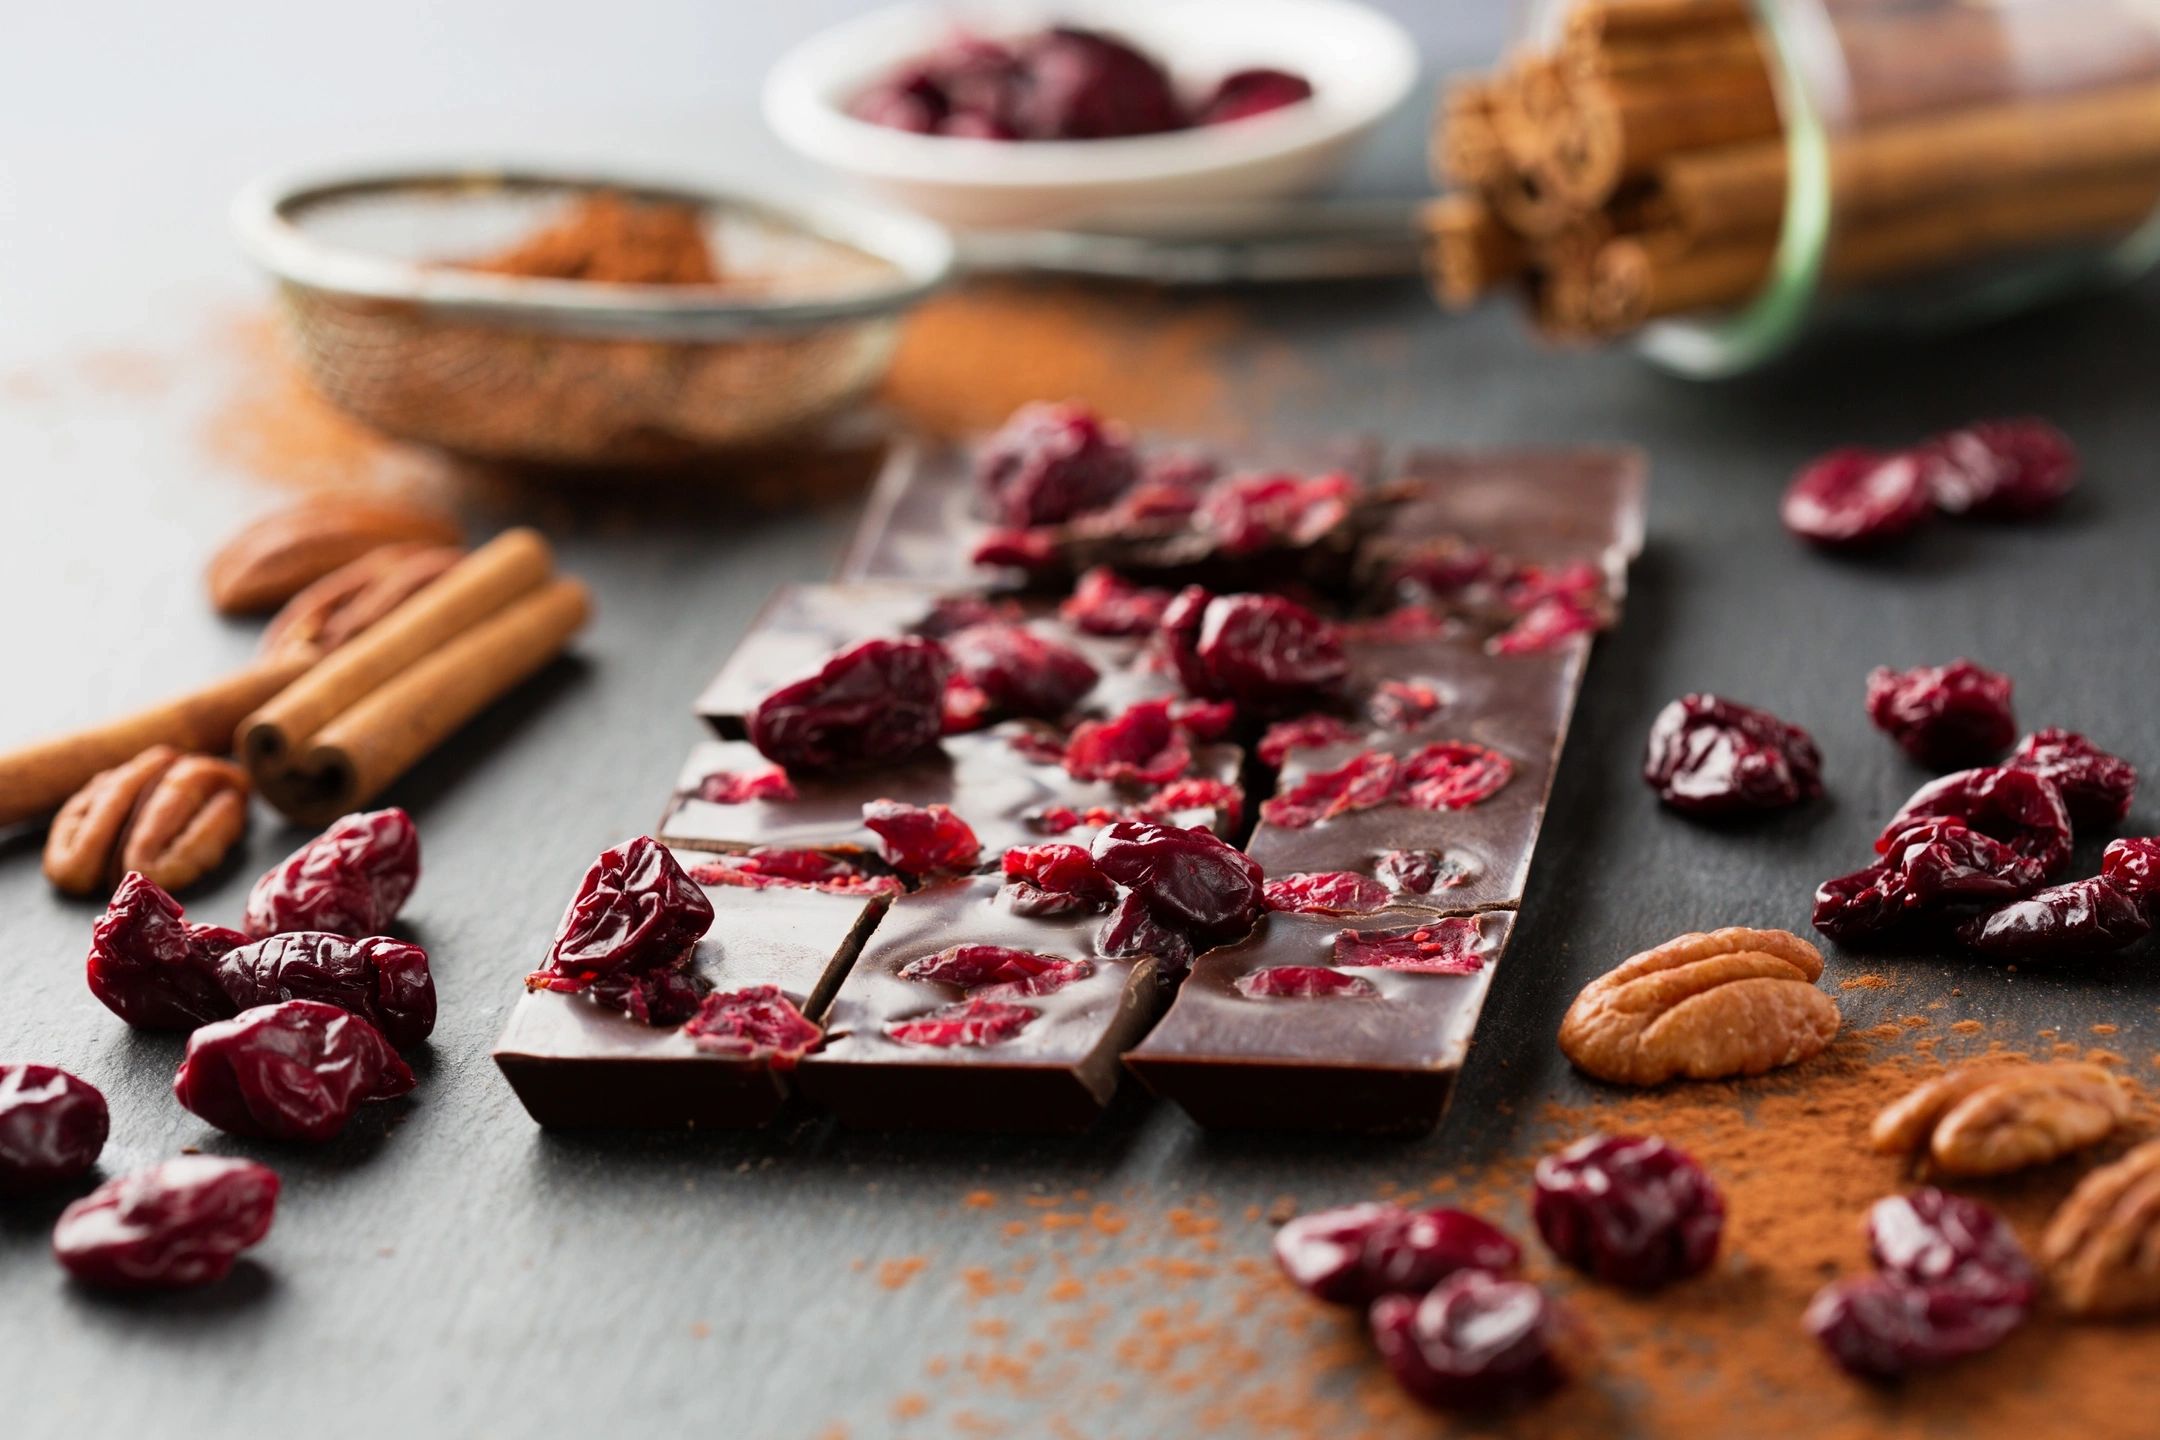 Chocolate with cranberry, cinnamon, and nuts / Healthy nutrition